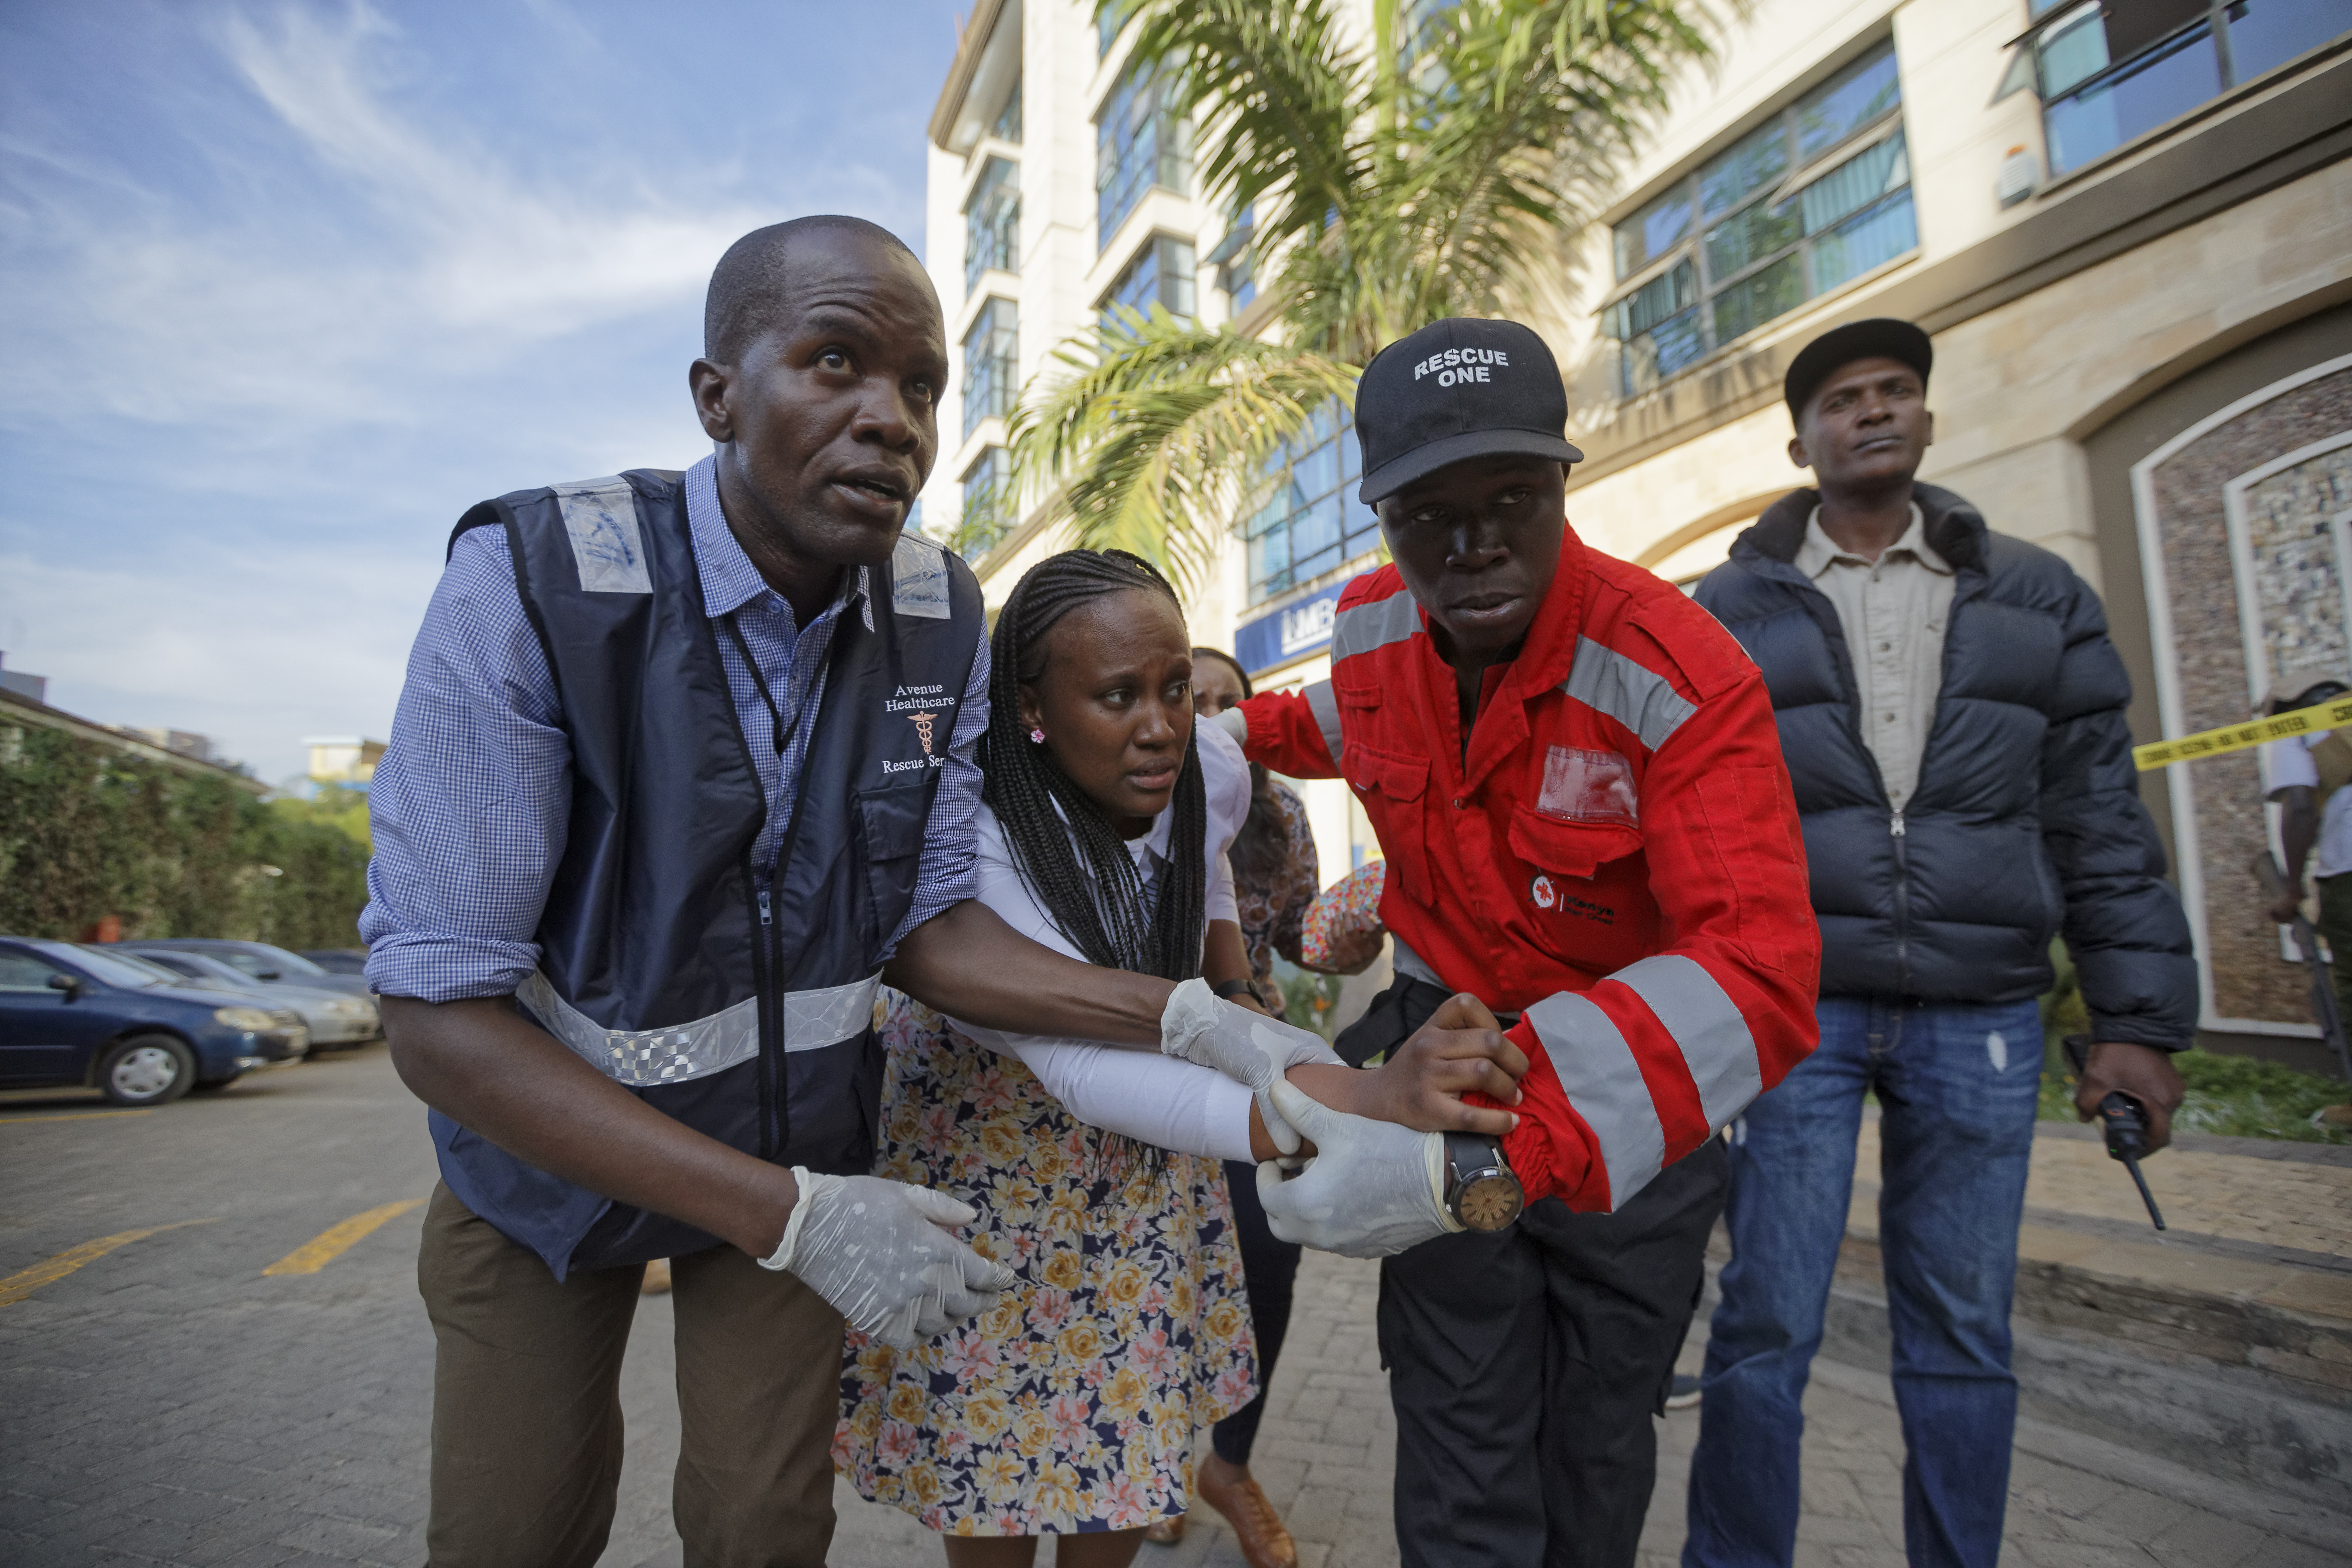 A civilian is helped by paramedics at a hotel complex in Nairobi, Kenya, where terrorists attacked an upscale hotel and office complex in January 2019, killing 21 people